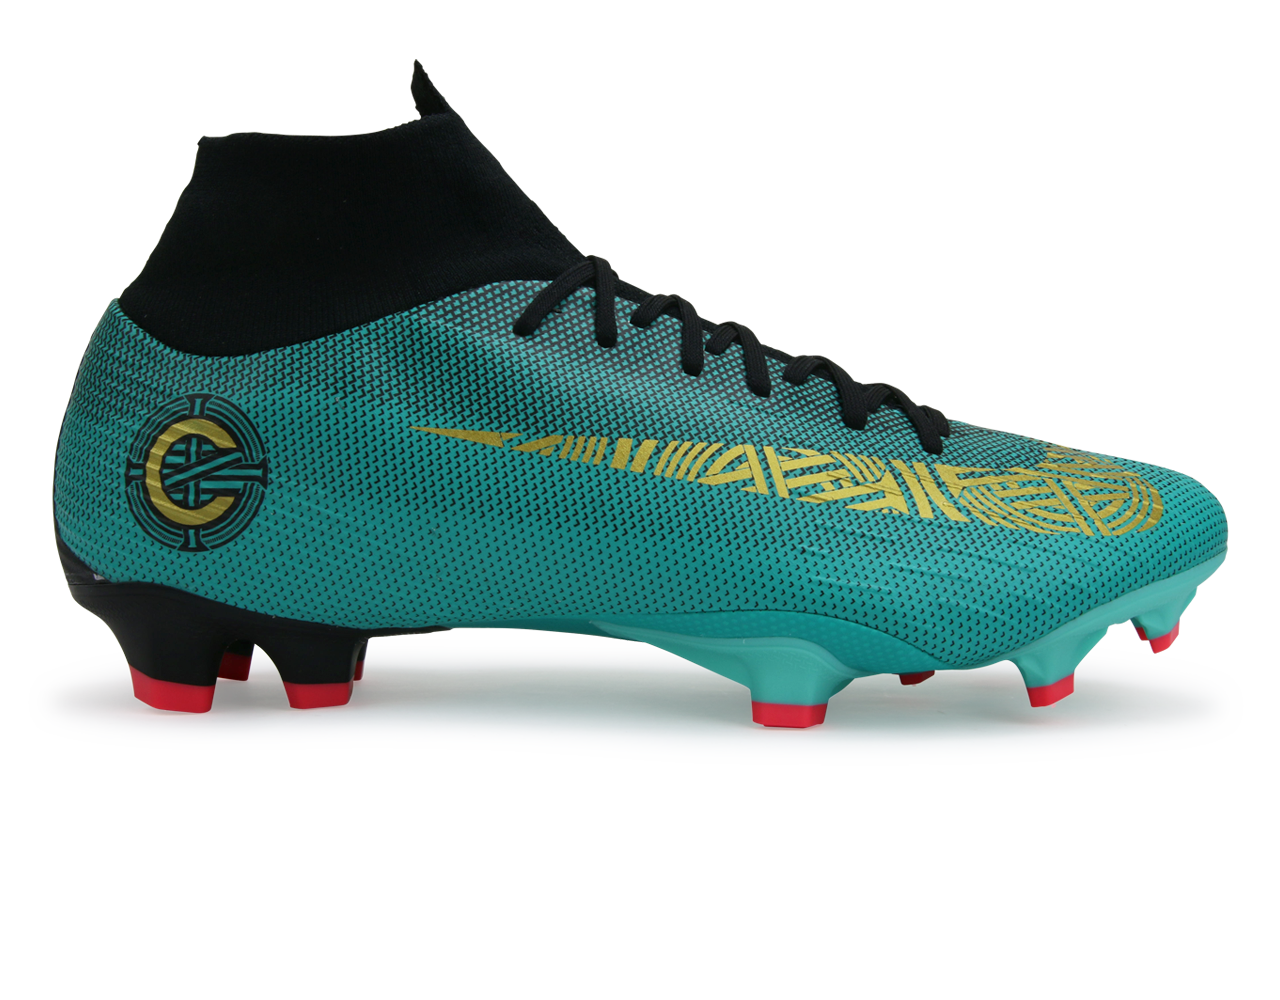 Nike Men's Mercurial CR7 Superfly 6 Pro FG Clear Jade/Hyper Turquoise